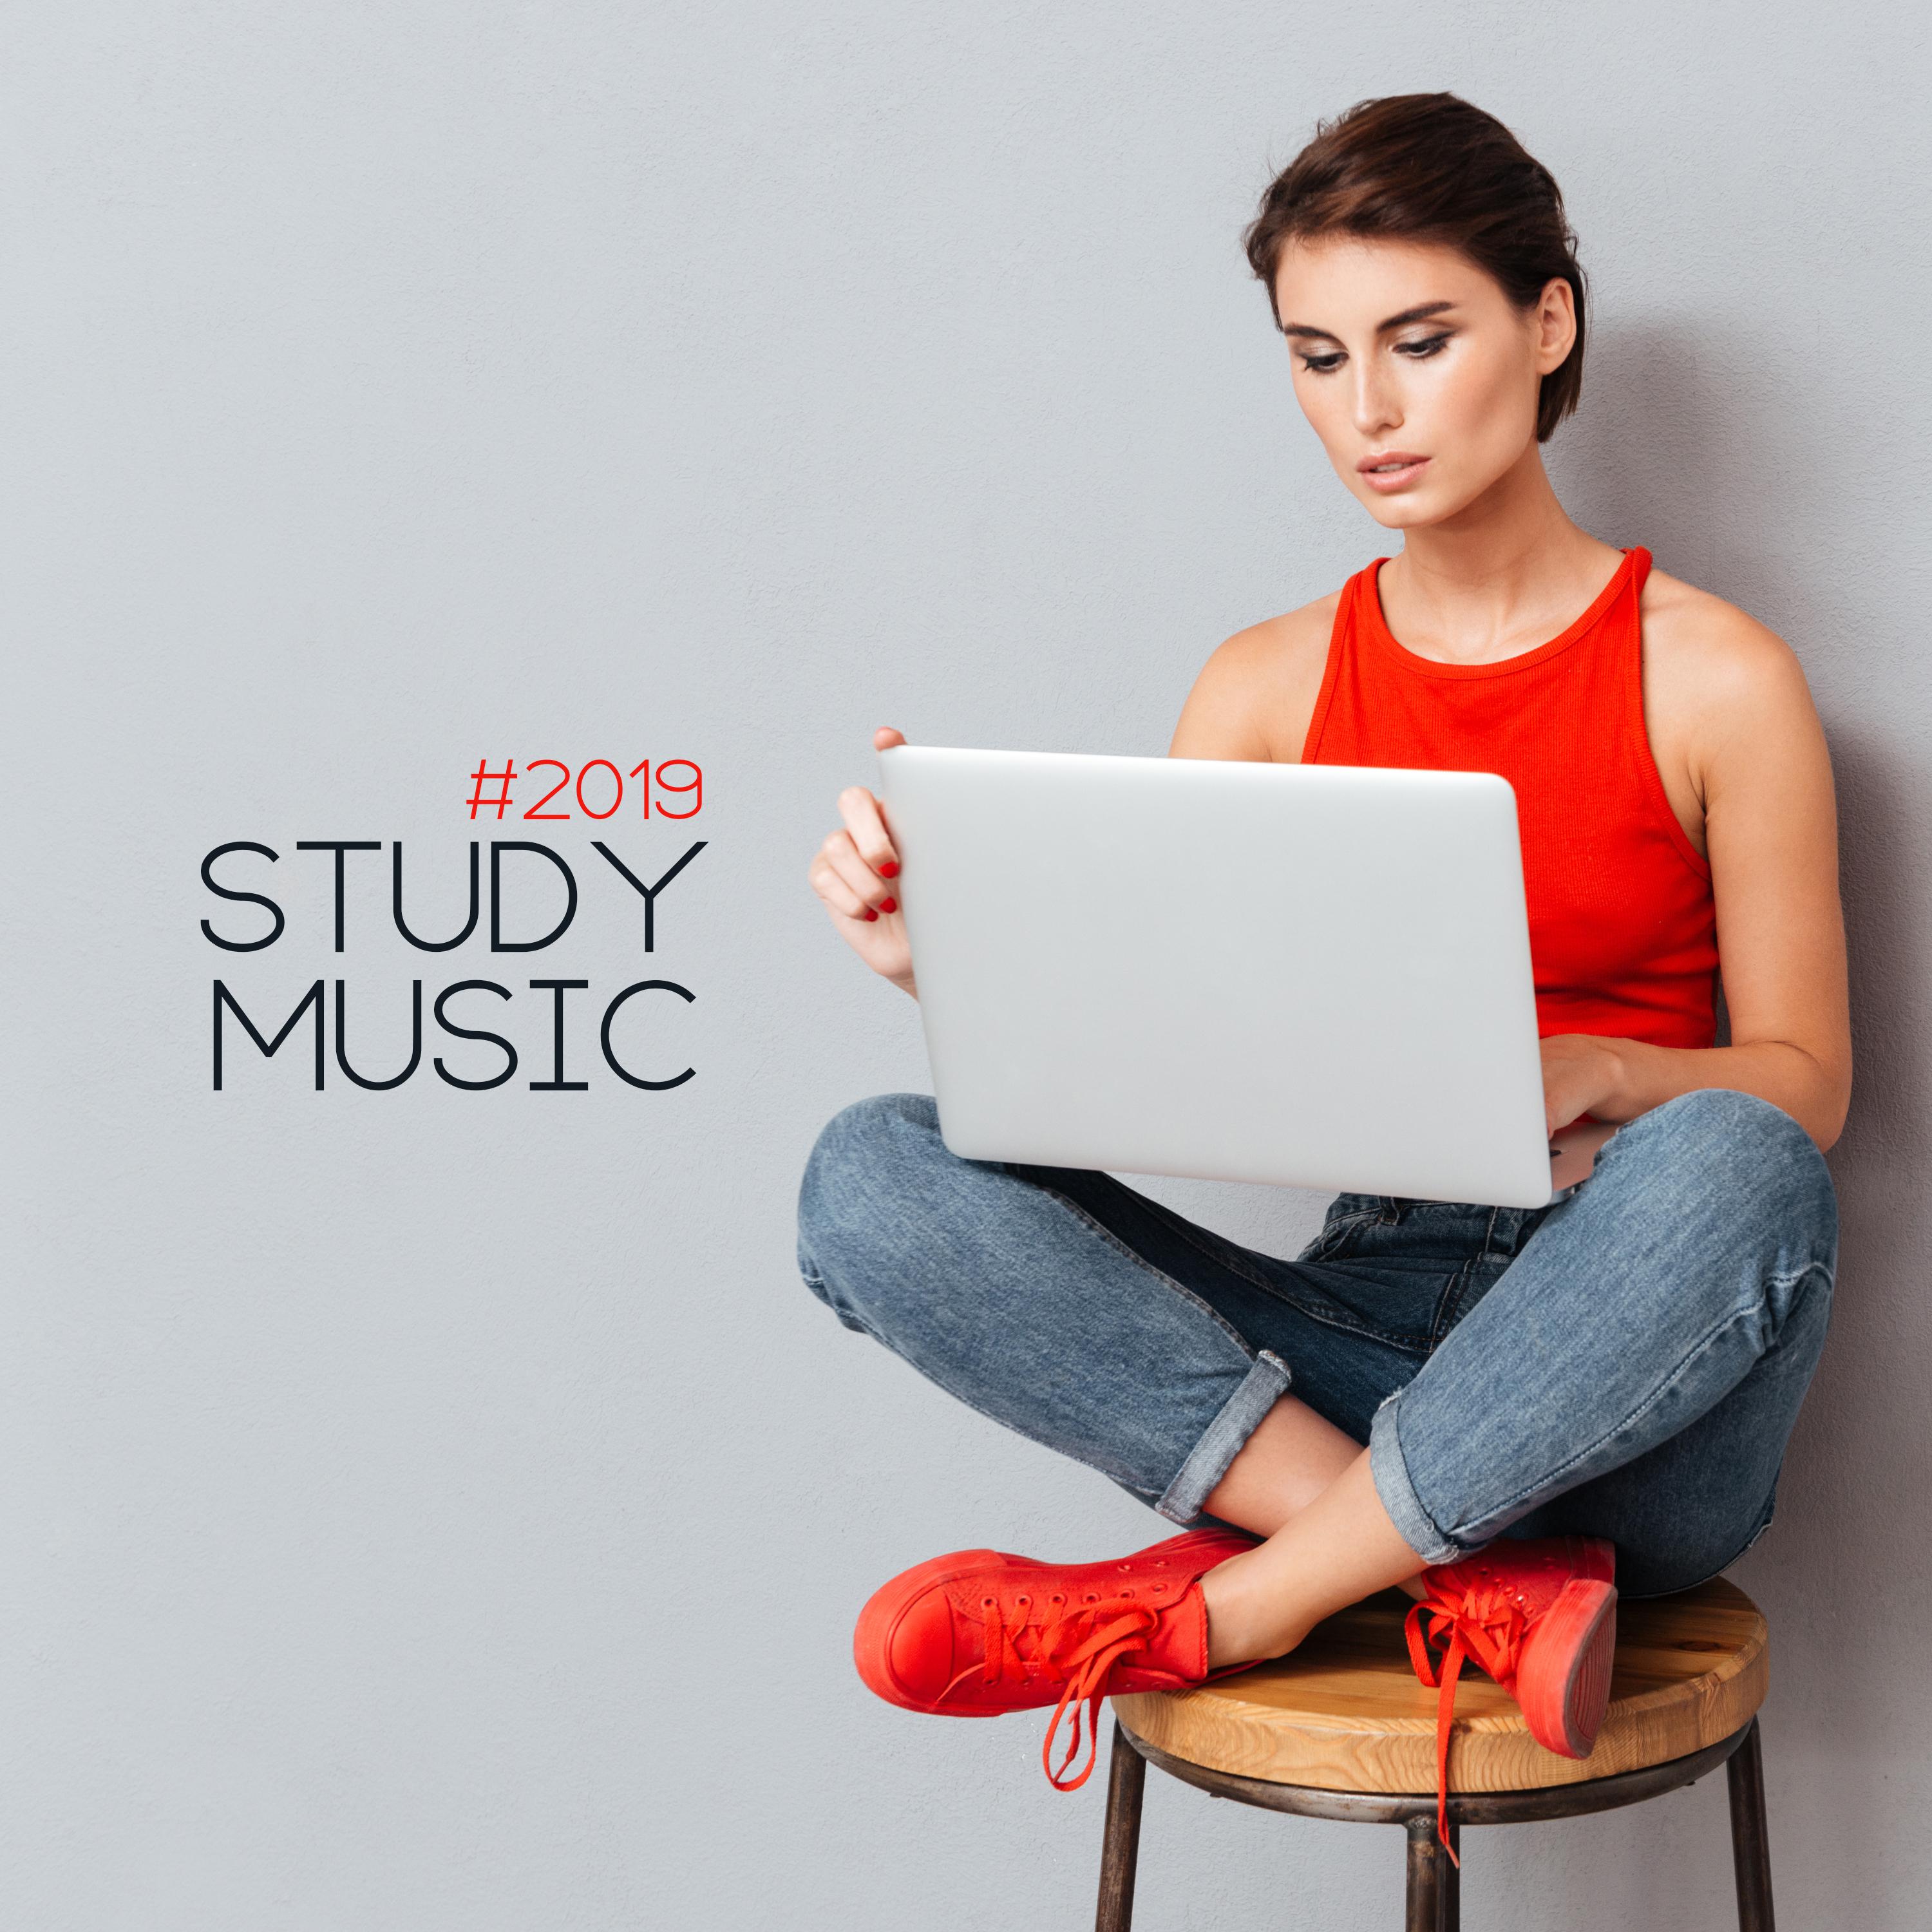 #2019 Study Music: Relaxing Sounds for Deep Concentration, Reading Music, Nature Sounds Reduce Stress, Soothing Sounds to Calm Down